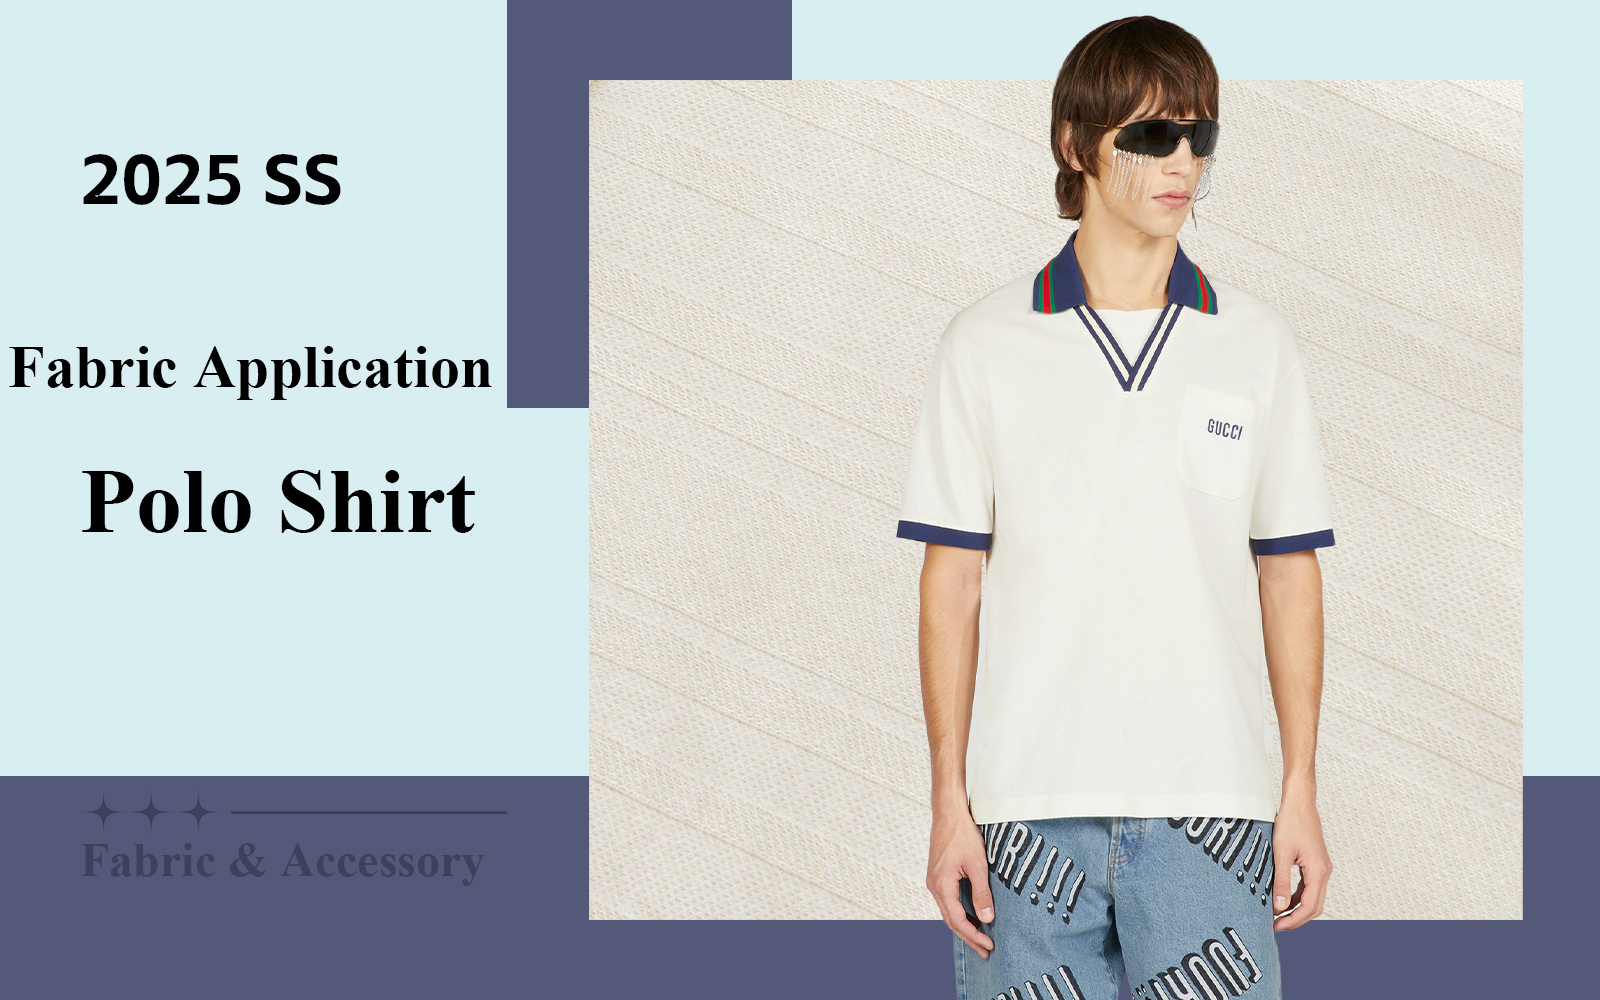 The Fabric Trend for Men's Polo Shirt